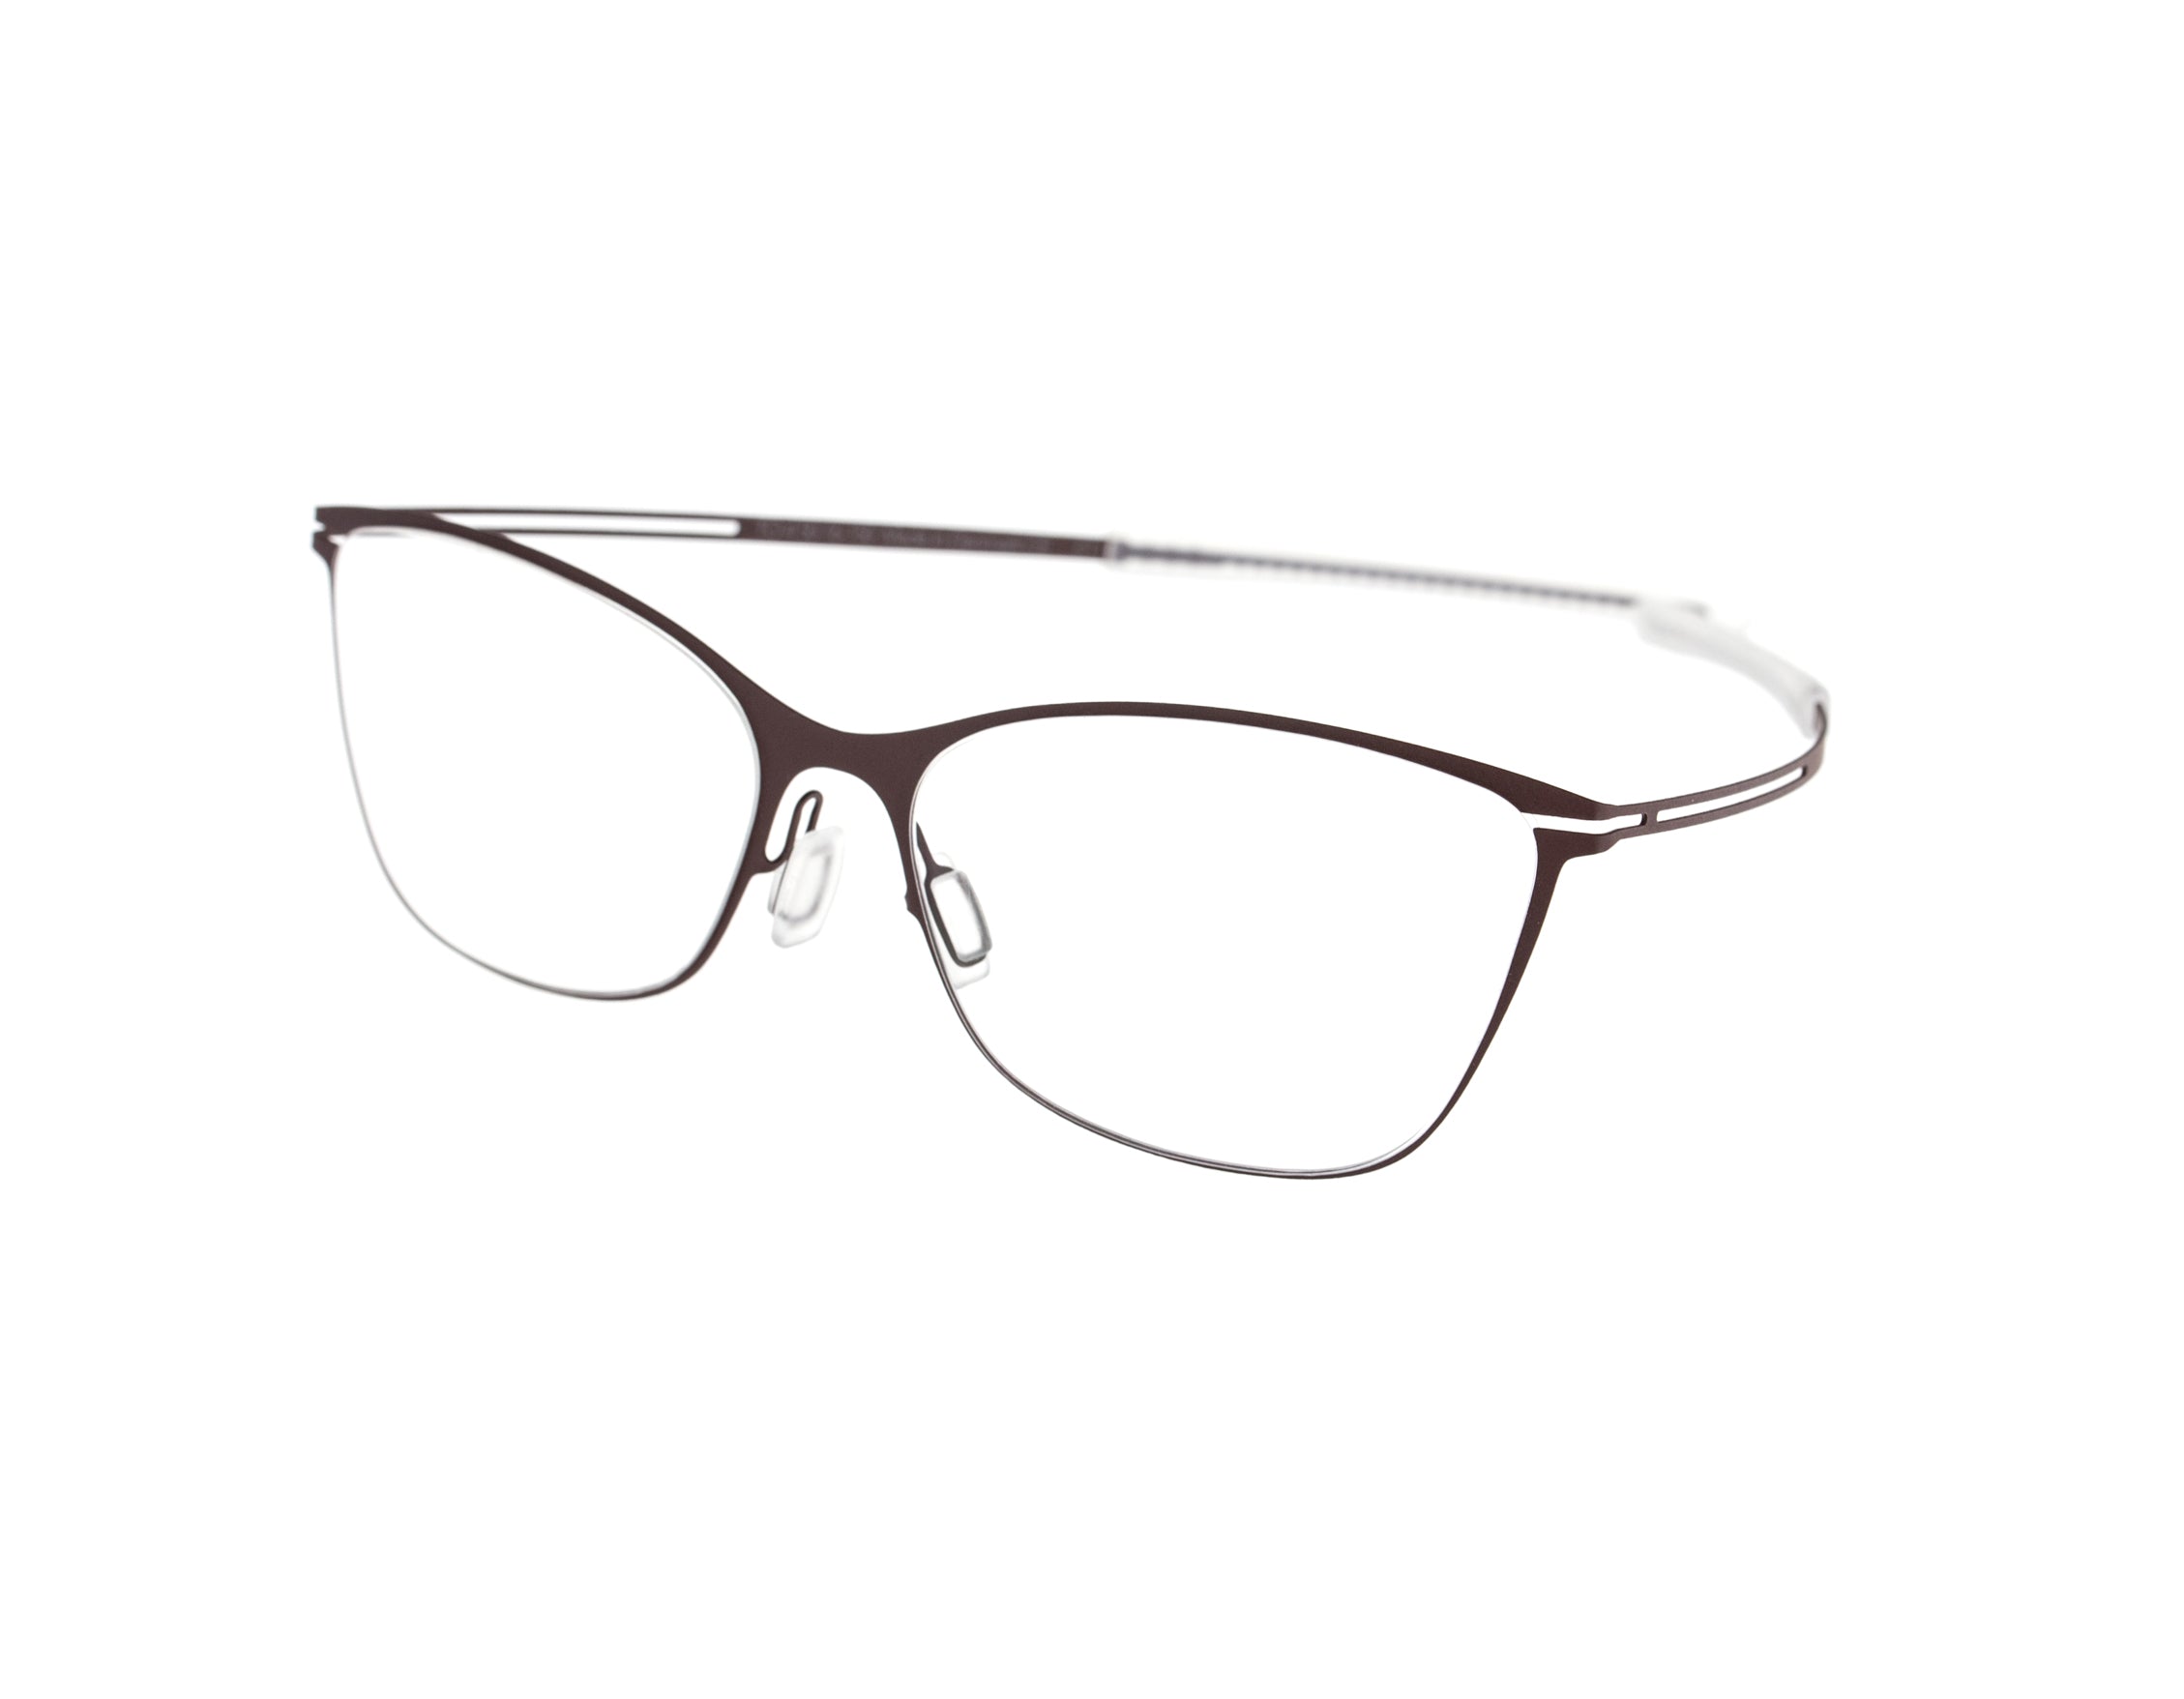 ONE by Thomsen Eyewear -  TO-4 col. 11